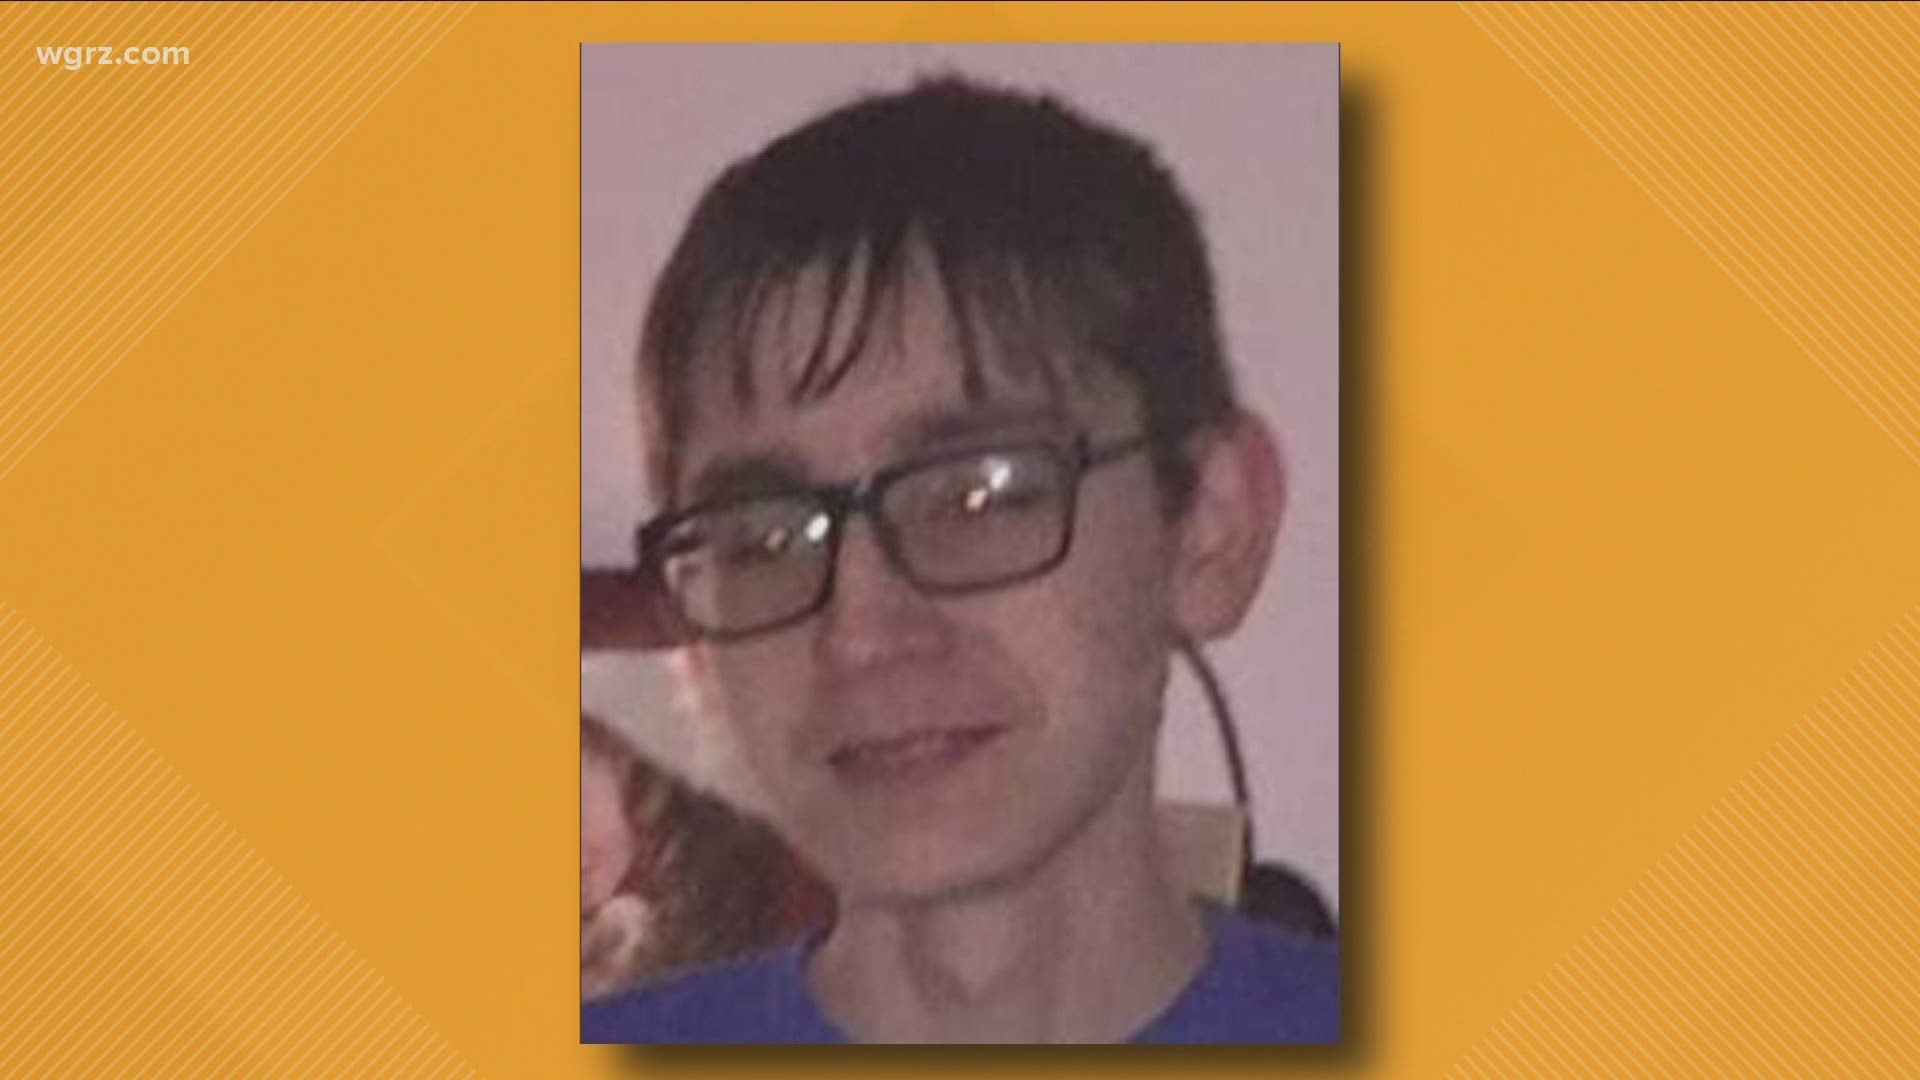 Zavier Apollo Botsford is a 17-year-old child last seen in the city of Salamanca on June 18th